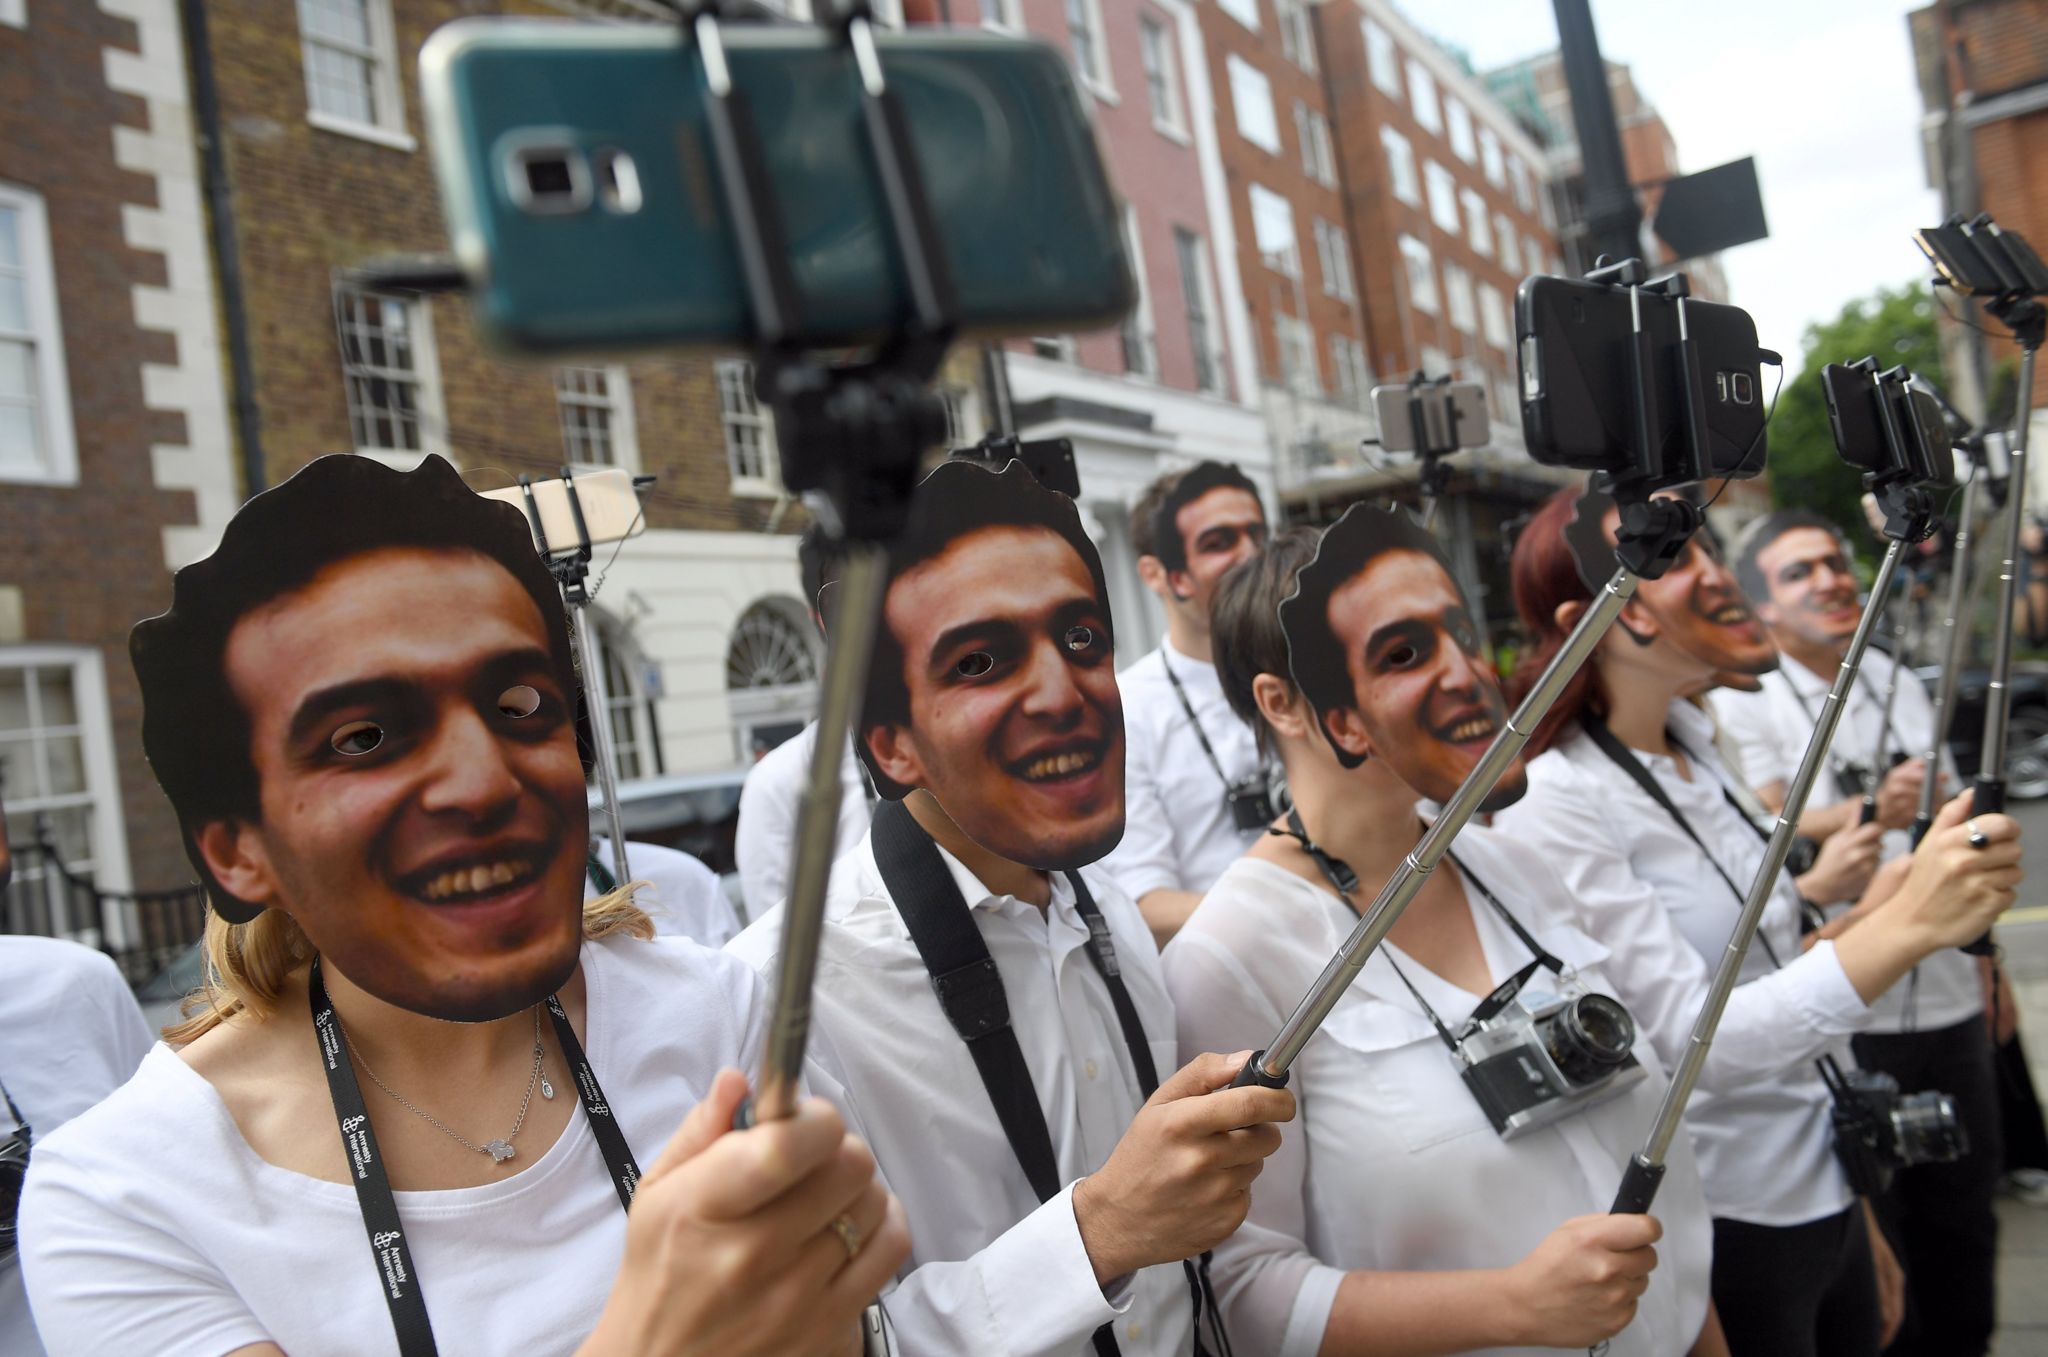 Demonstrators take selfies outside the Egyptian Embassy to bring attention to detained photojournalist Mahmoud Abu Zeid, also known as "Shawkan", in central London August 14, 2017.